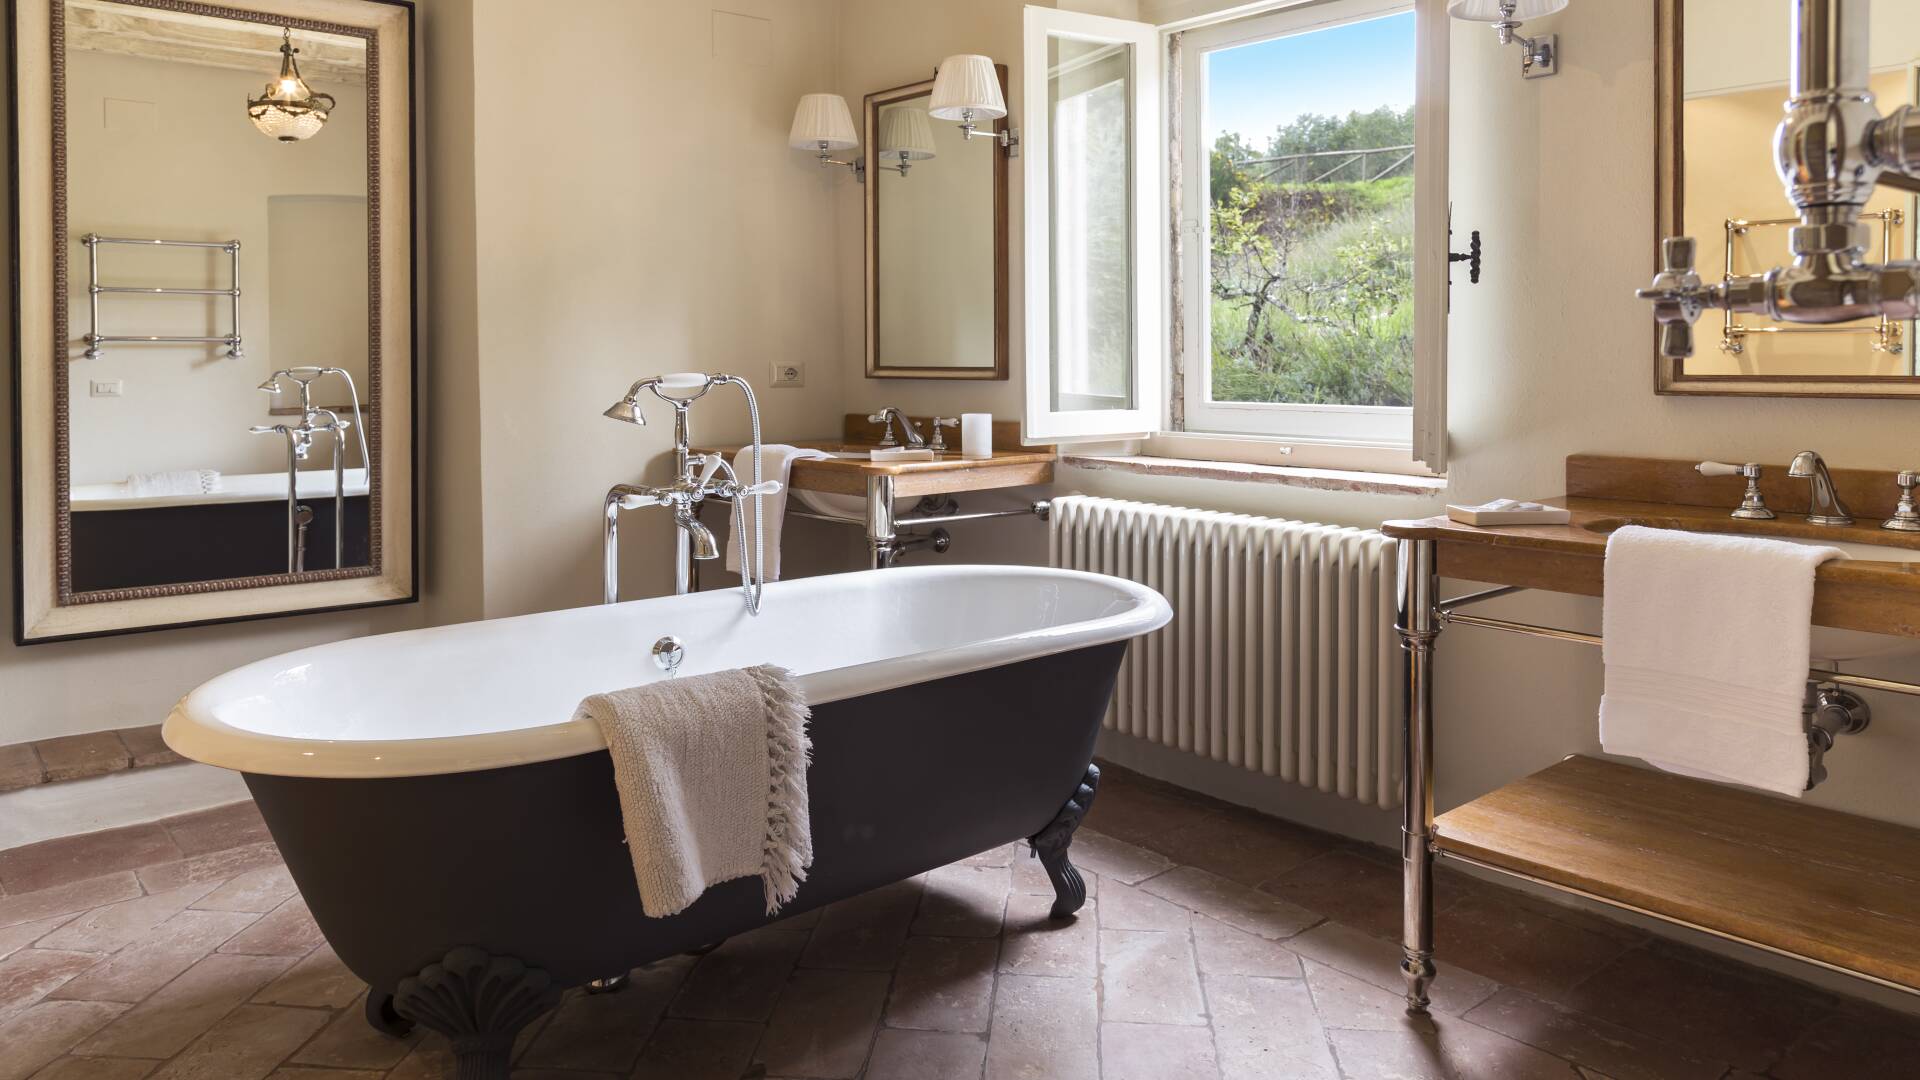 en suite bathroom with bath tub and countryside view